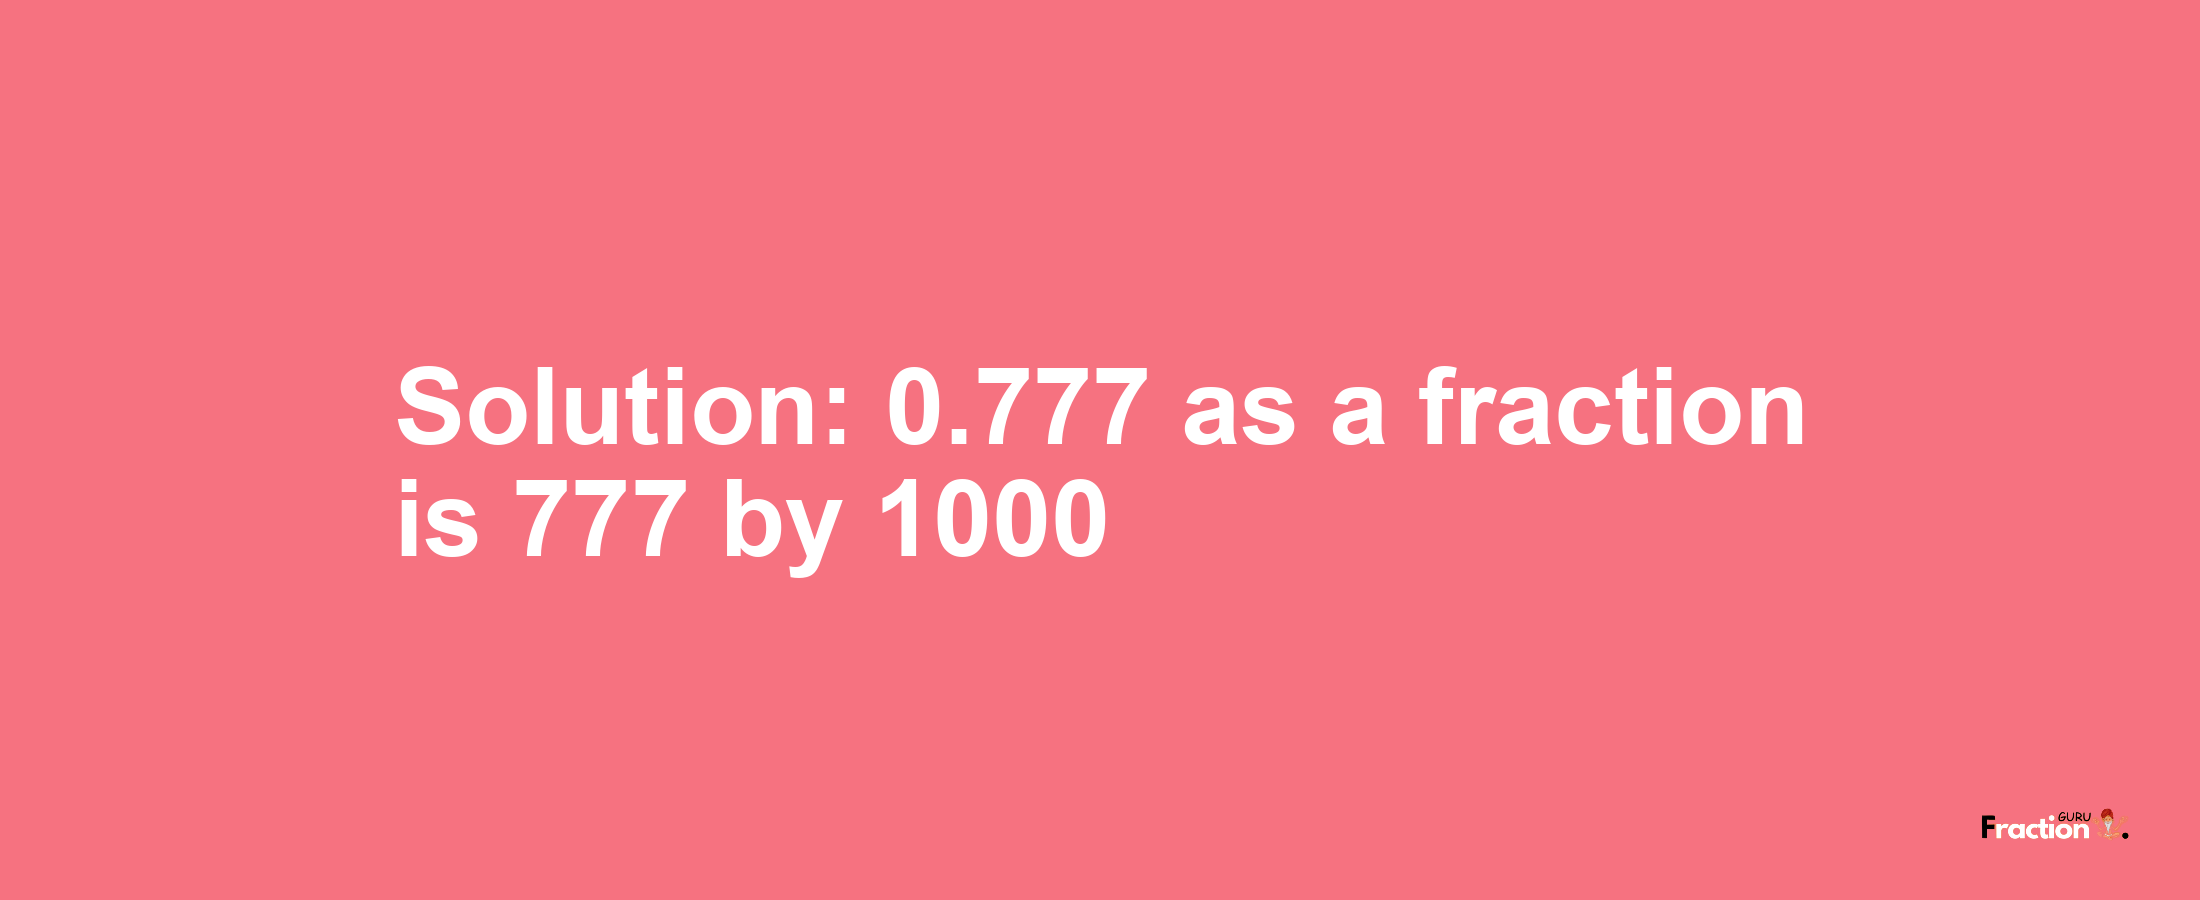 Solution:0.777 as a fraction is 777/1000